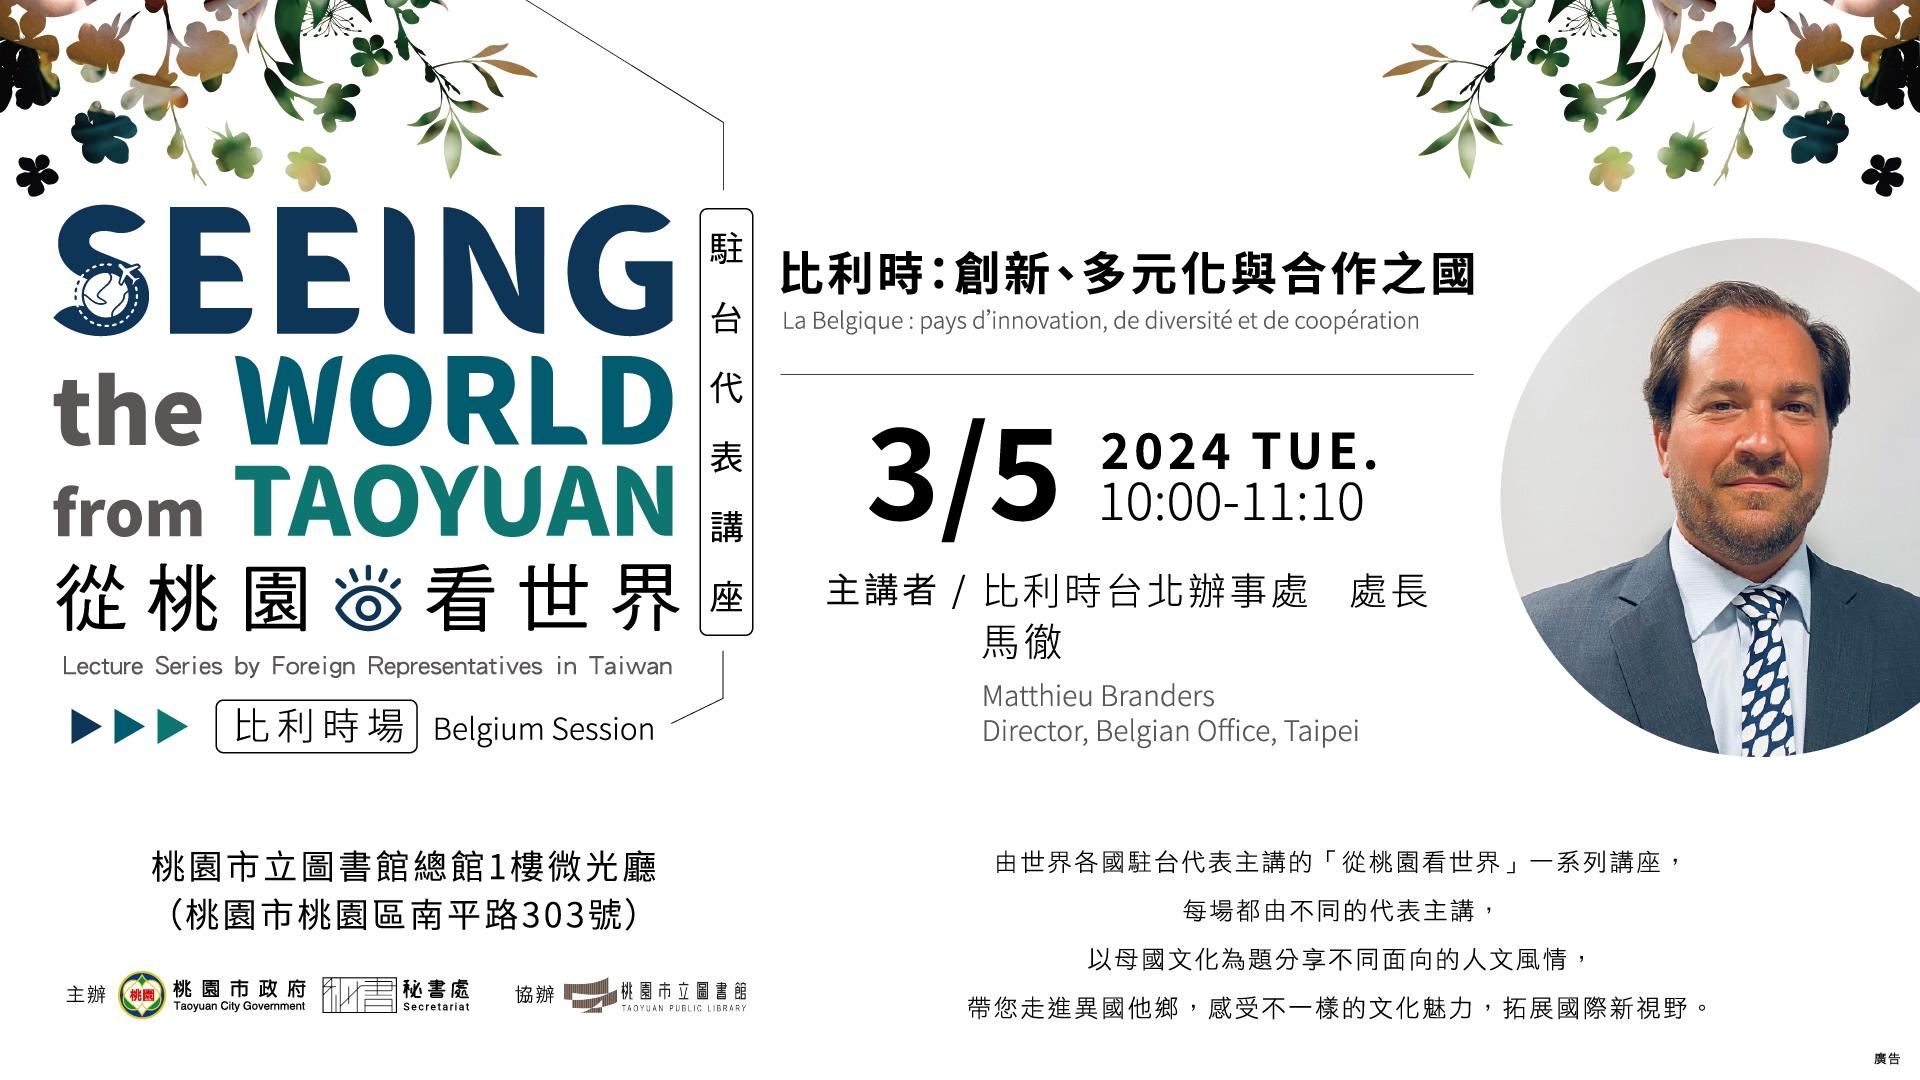 "Seeing the World from Taoyuan" Lecture Series by Foreign Representatives in Taiwan-Czech Session